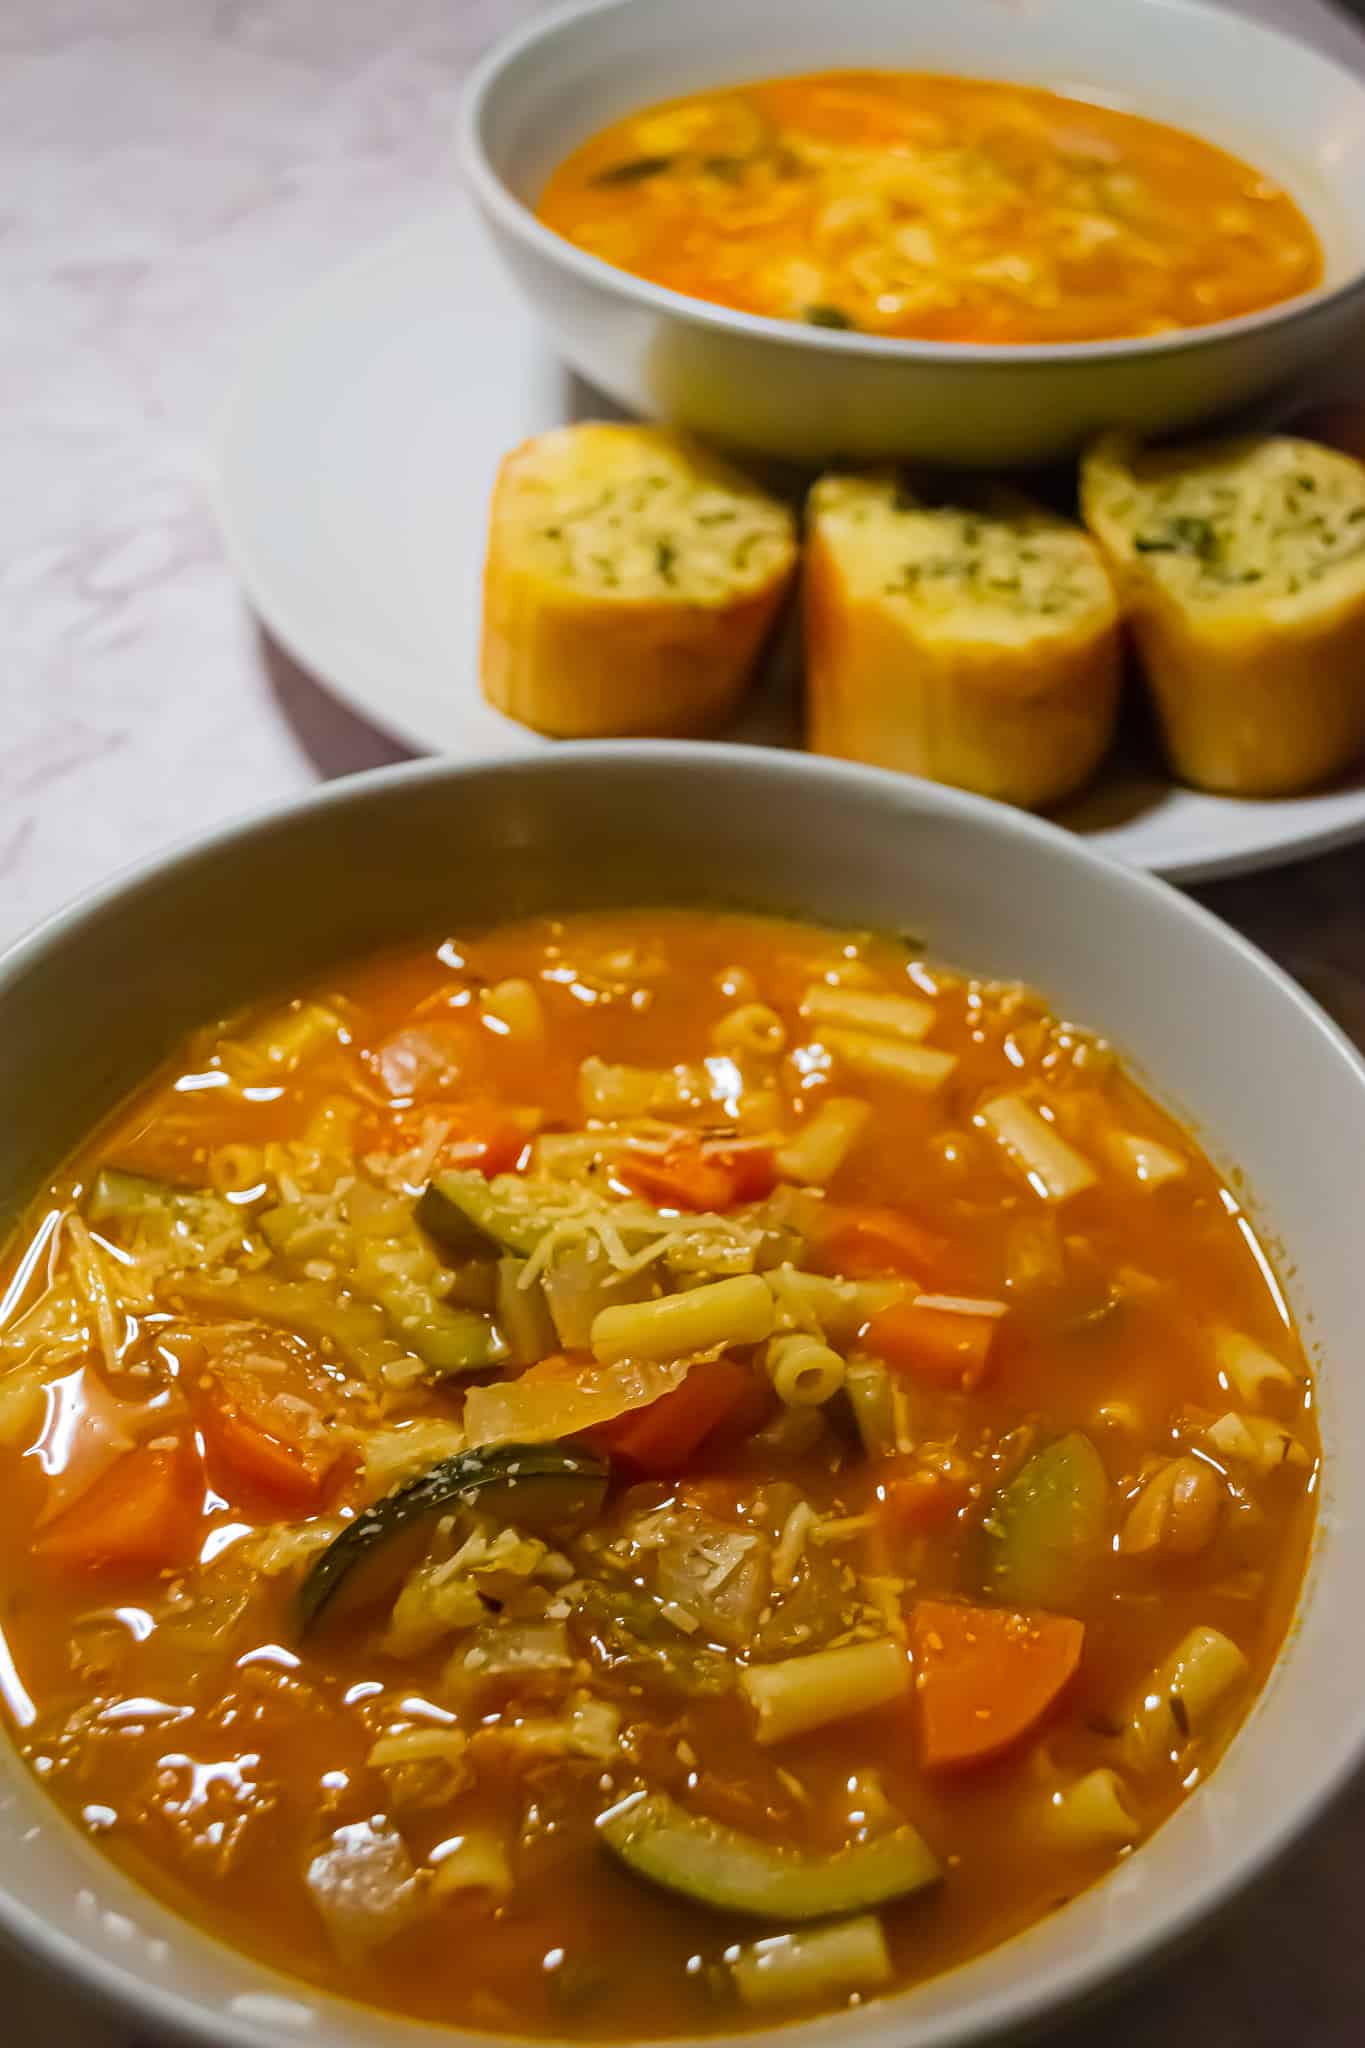 Close up shot of a bowl of healthy minestrone soup. In the background, you can see another bowl of soup on a plate with a side of garlic bread.